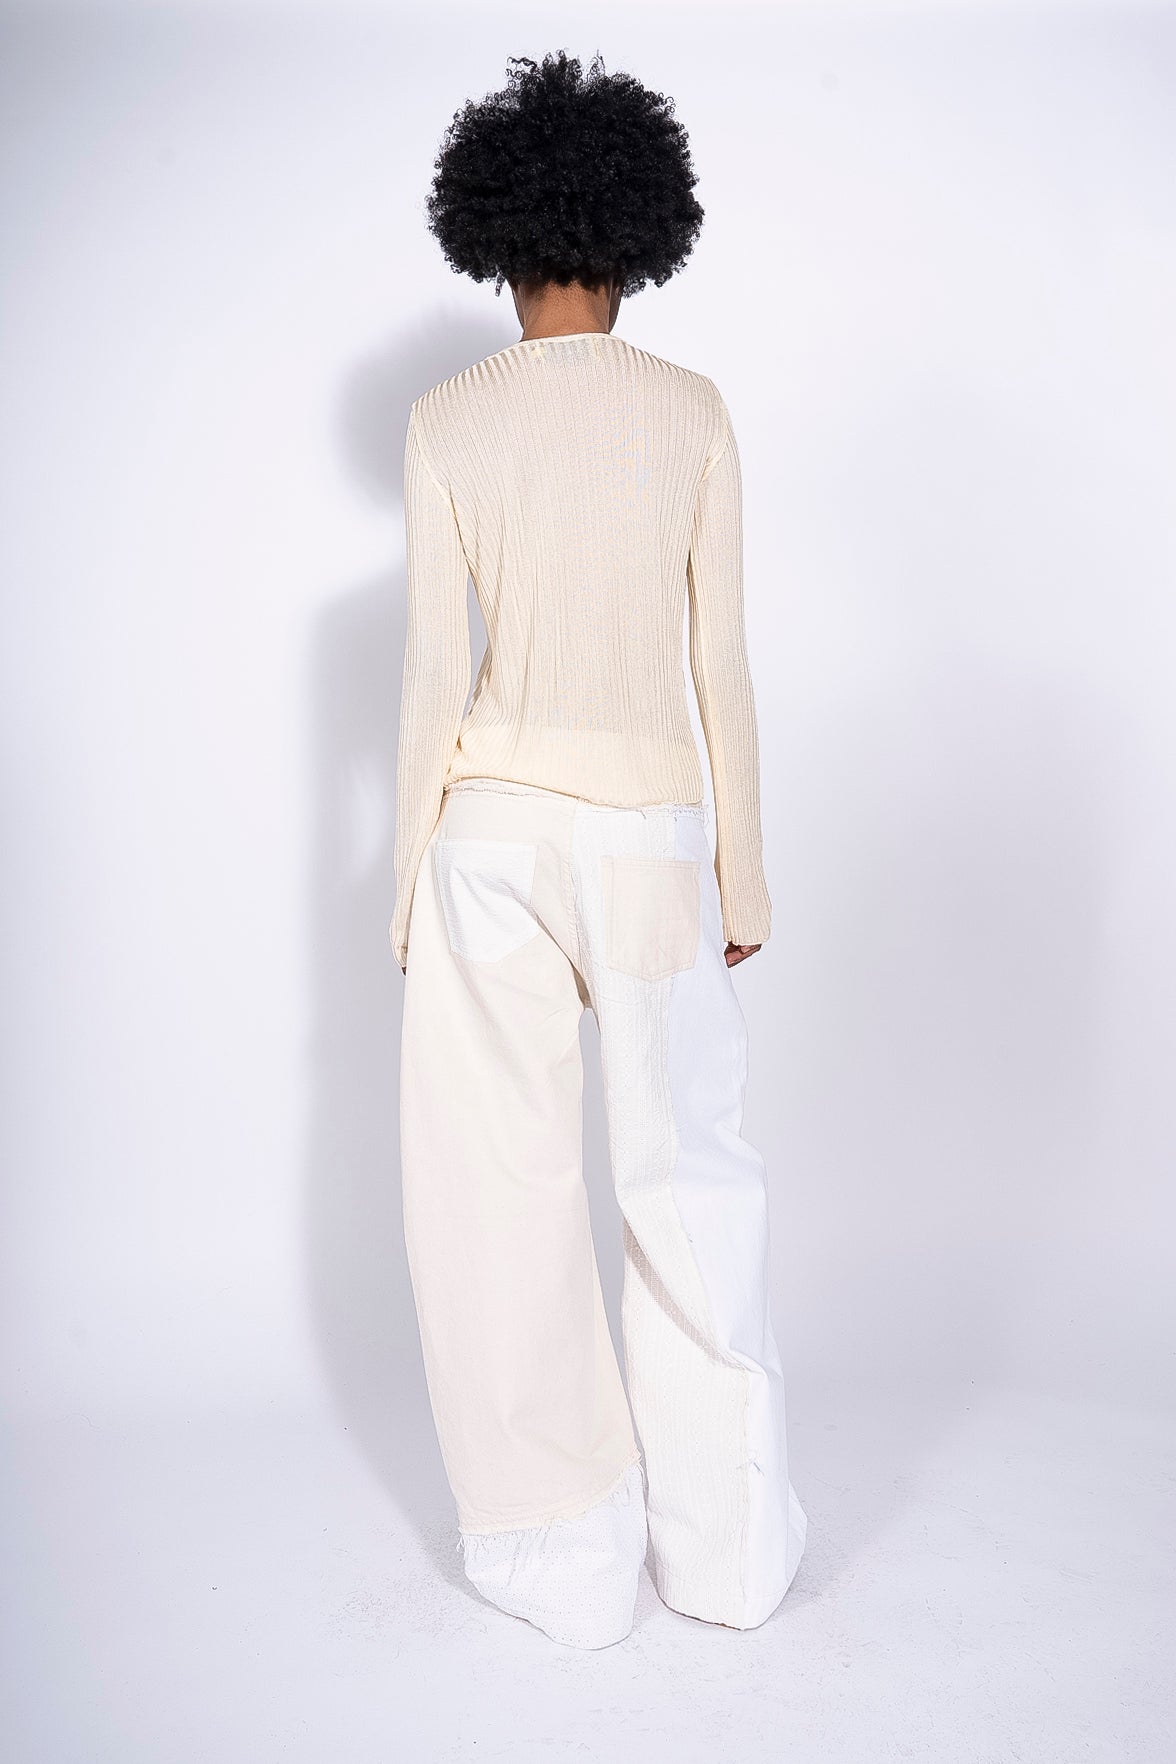 BEIGE FITTED JUMPER IN LIGHT WEIGHT KNIT marques almeida